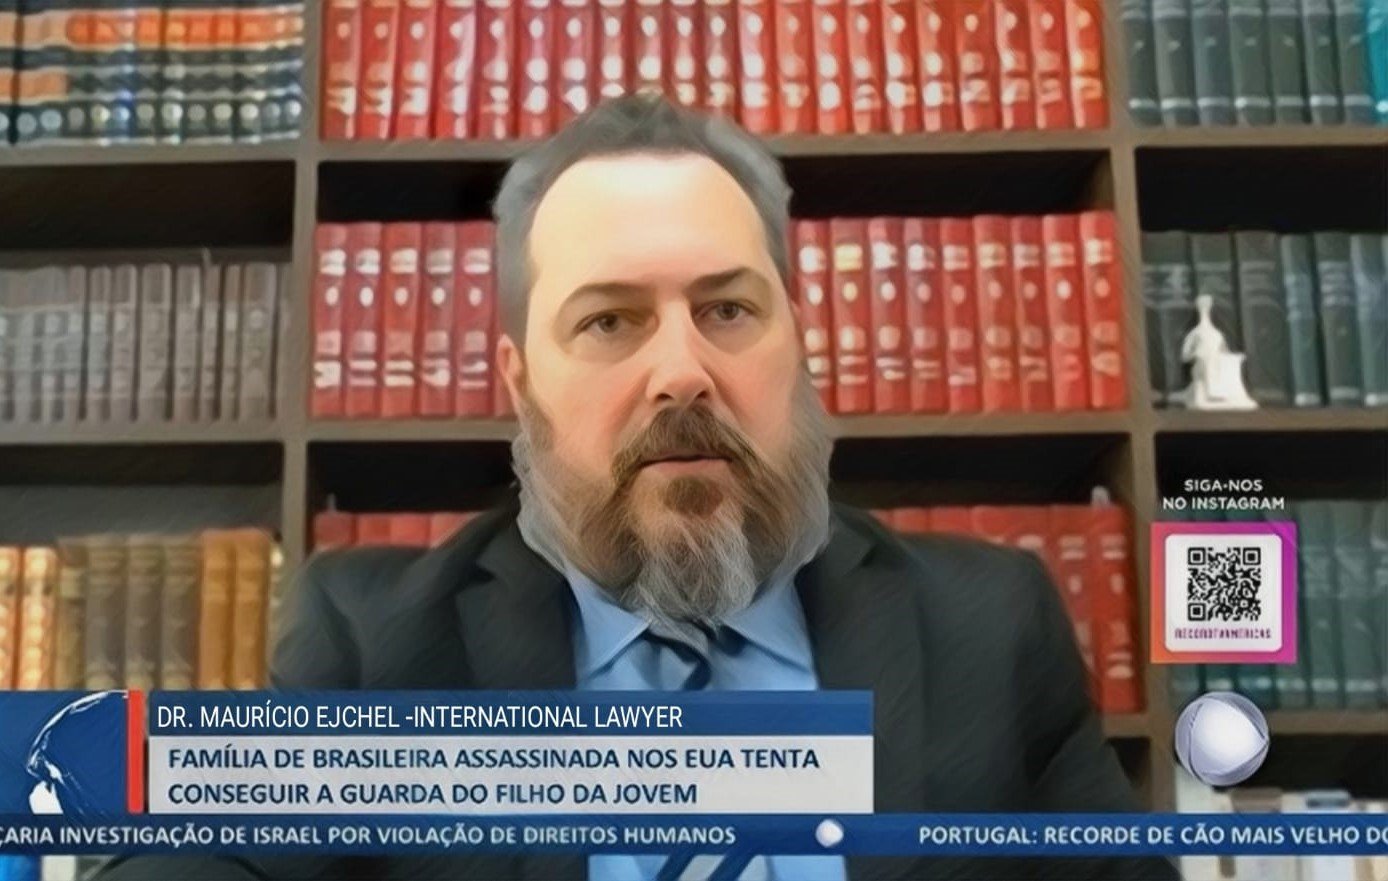 International lawyer Dr. Mauricio Ejchel appearing on 'Américas no Ar', engaged in providing specialized legal advice for a case involving Brazilian citizens in the USA, demonstrating his expertise in international law for Brazilians and foreigners